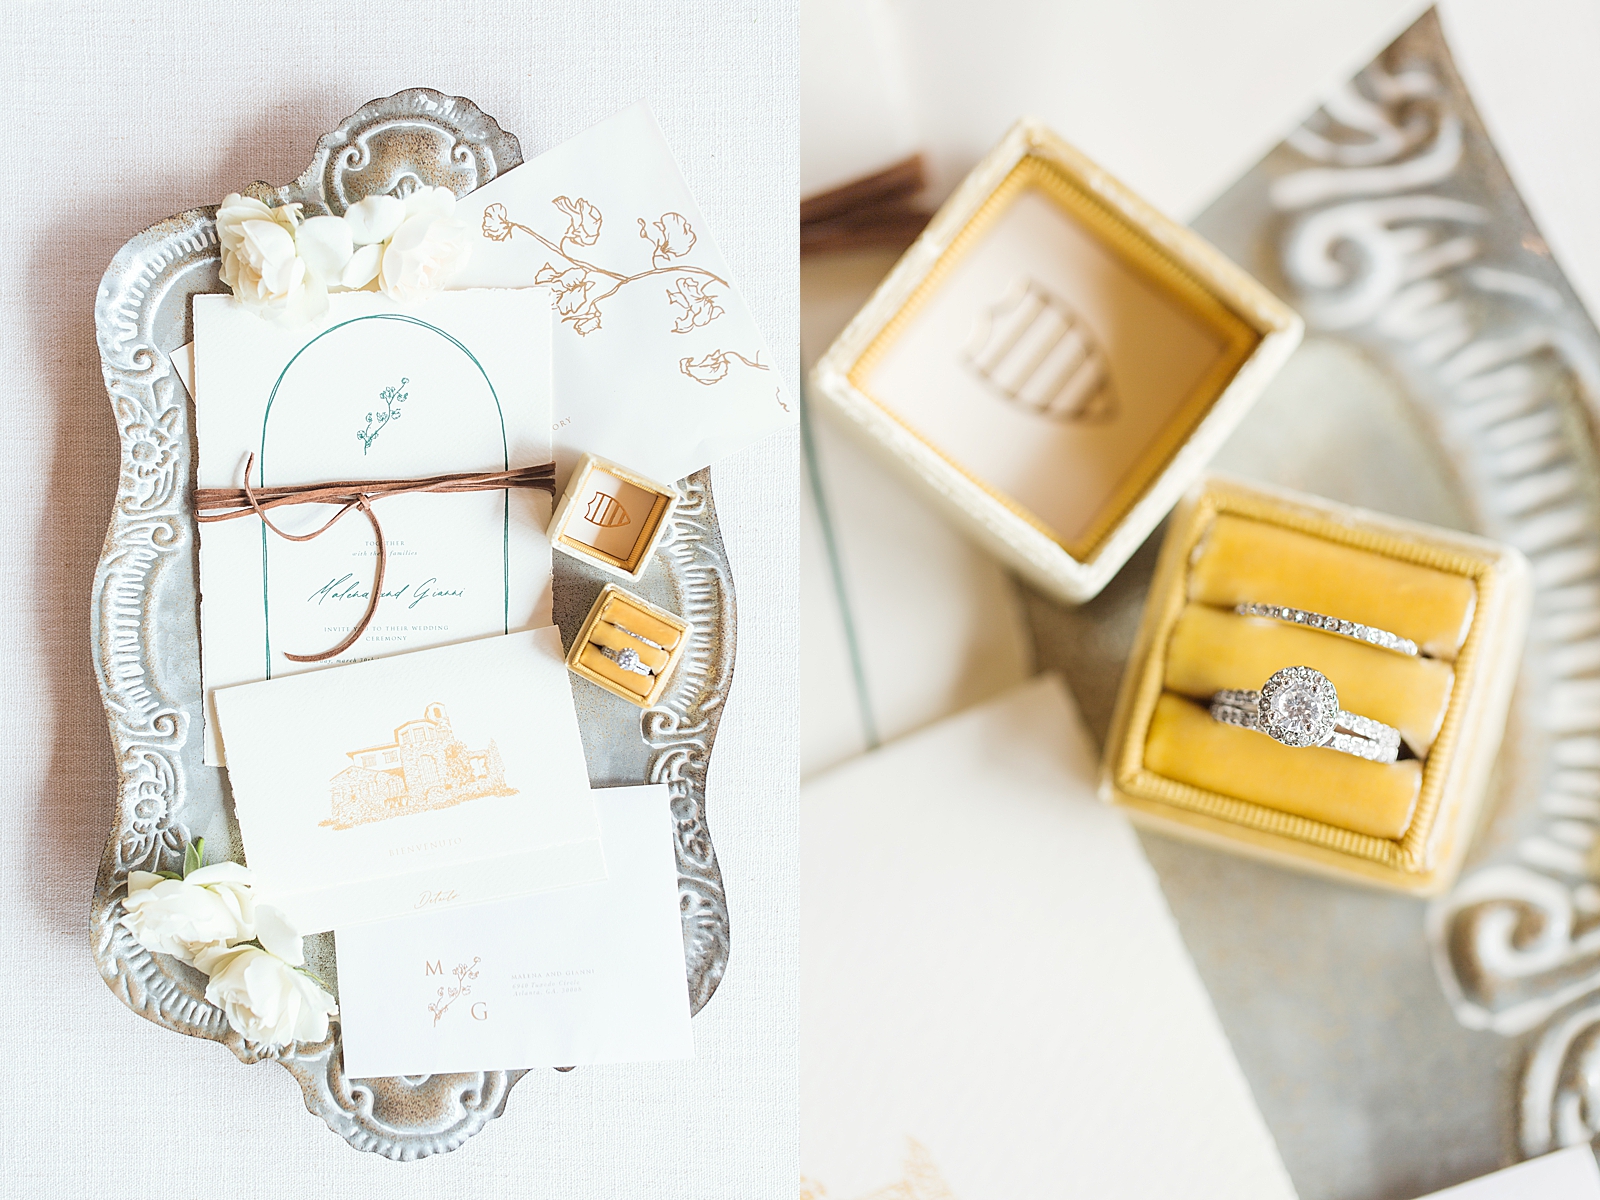 Montaluce Winery Wedding Invitation Suite on metal tray and wedding rings in yellow ring box Photo